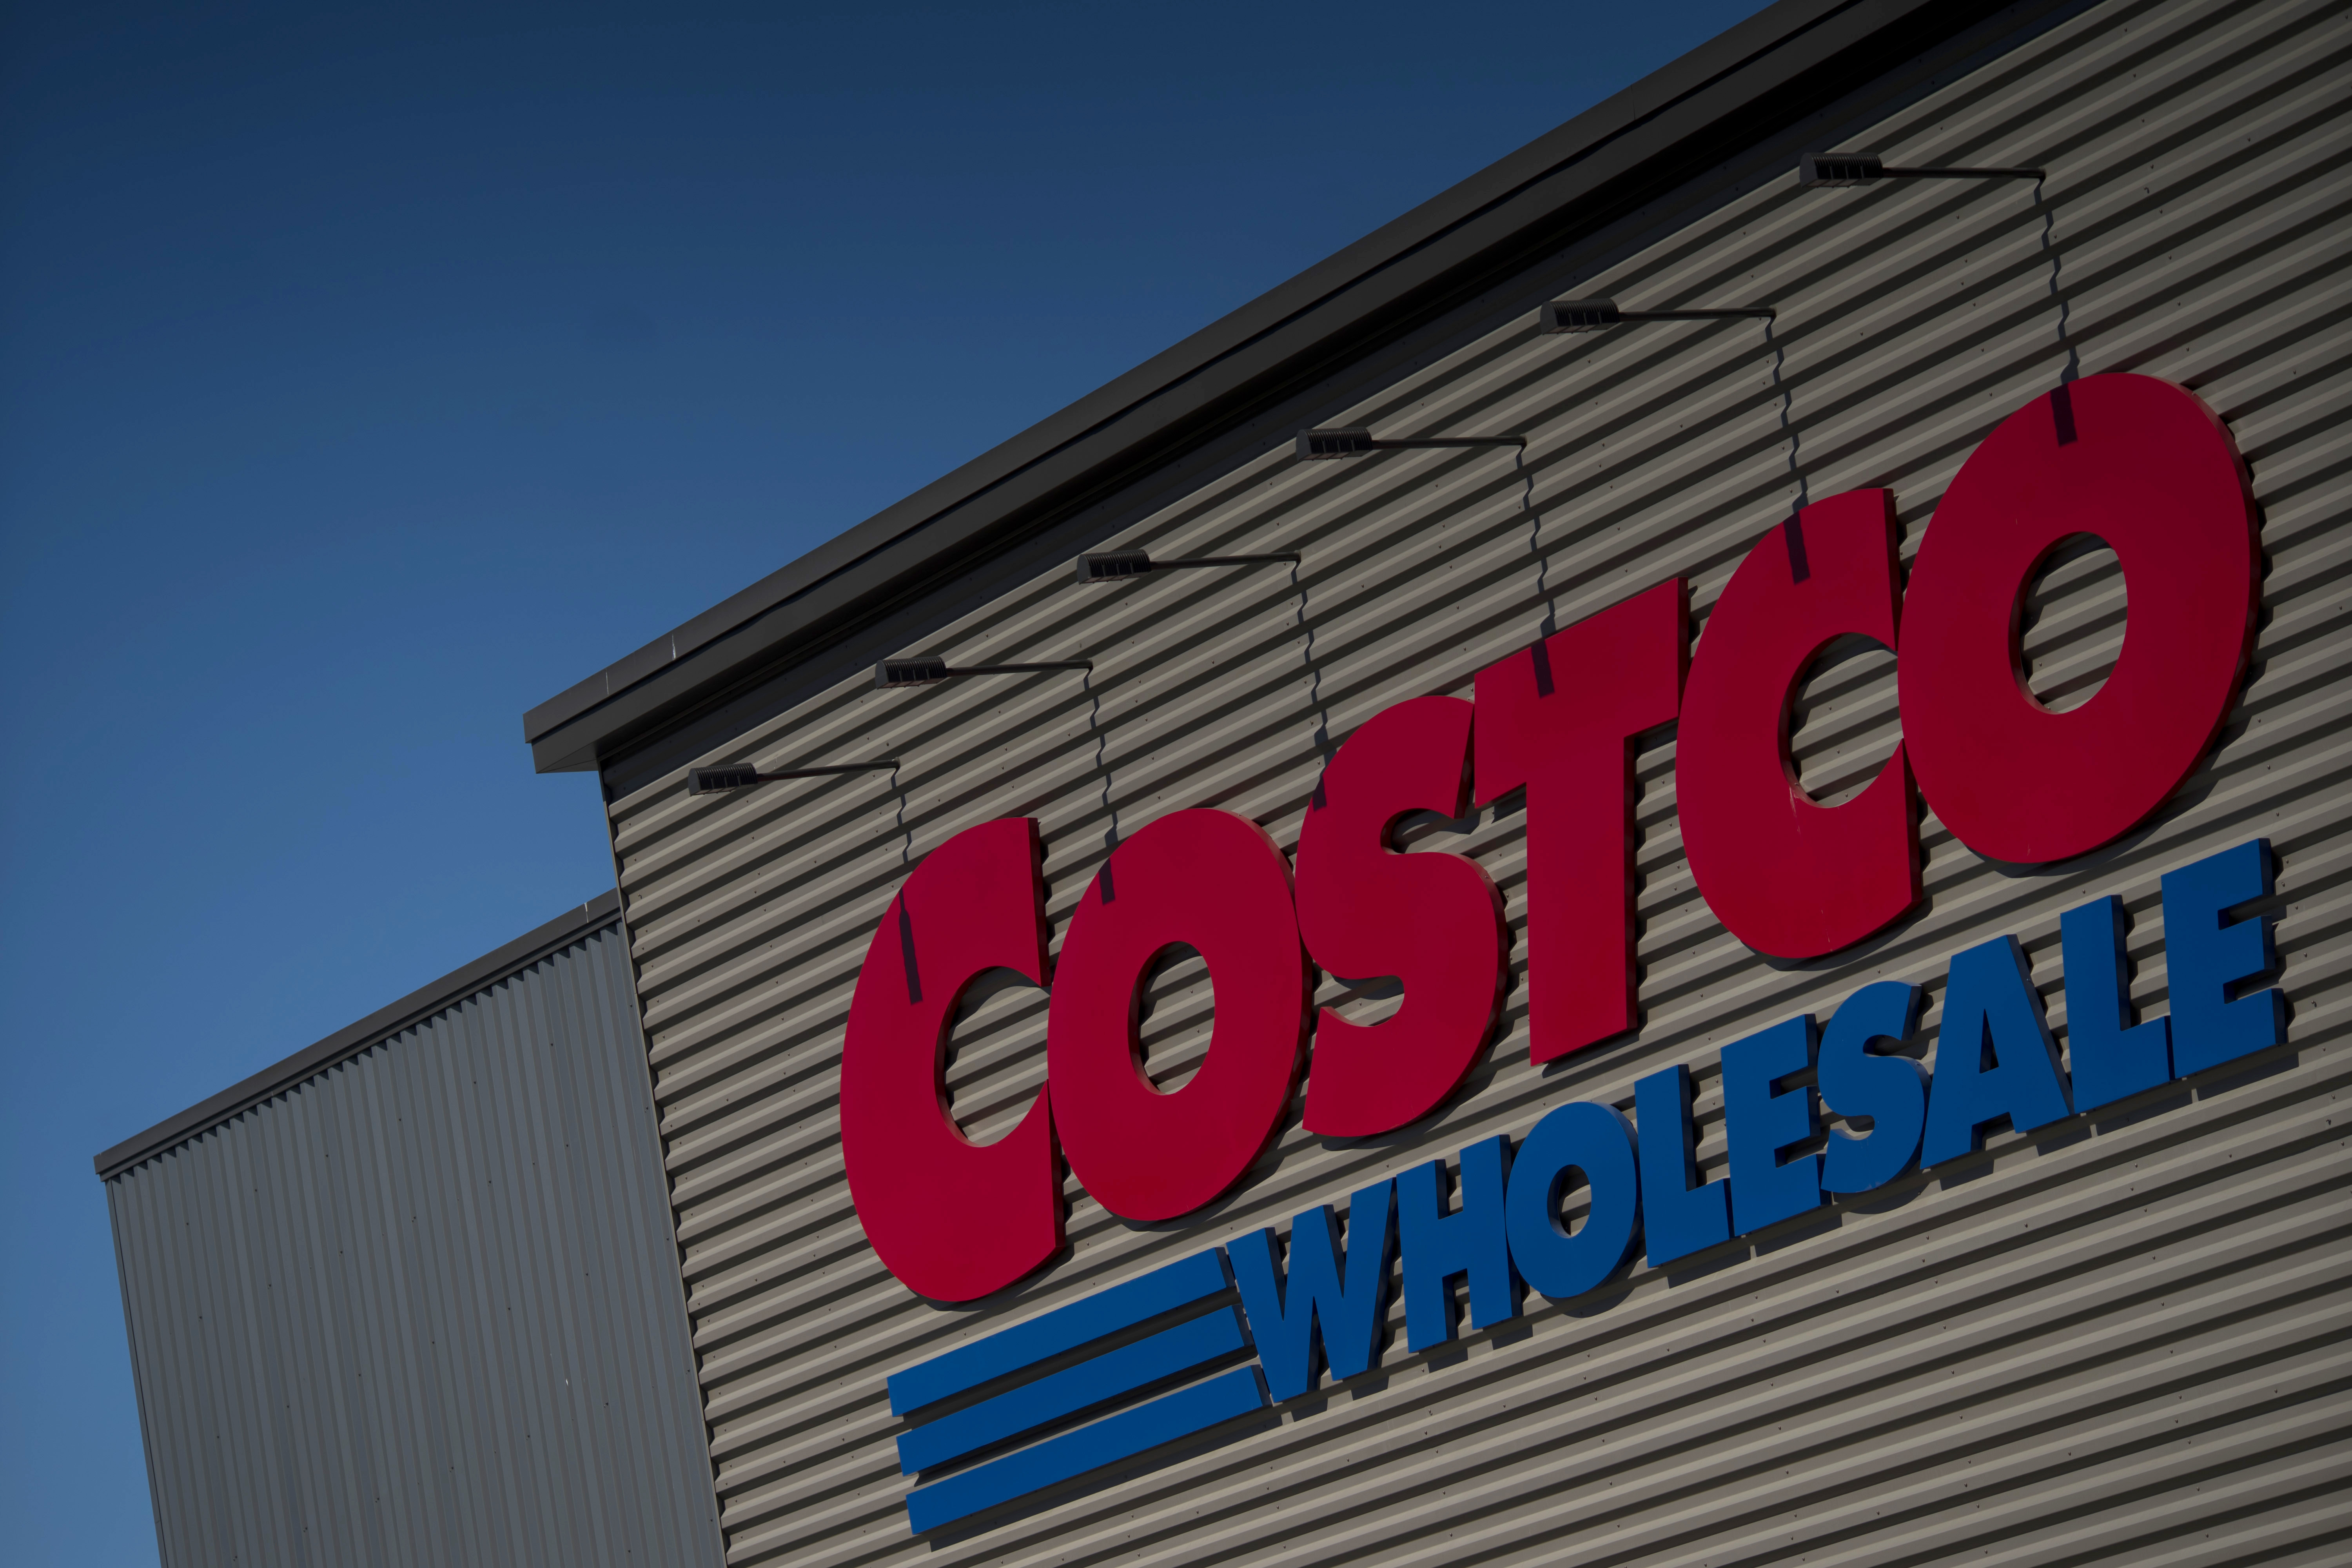 Costco named ‘company of the year’ by Yahoo Finance